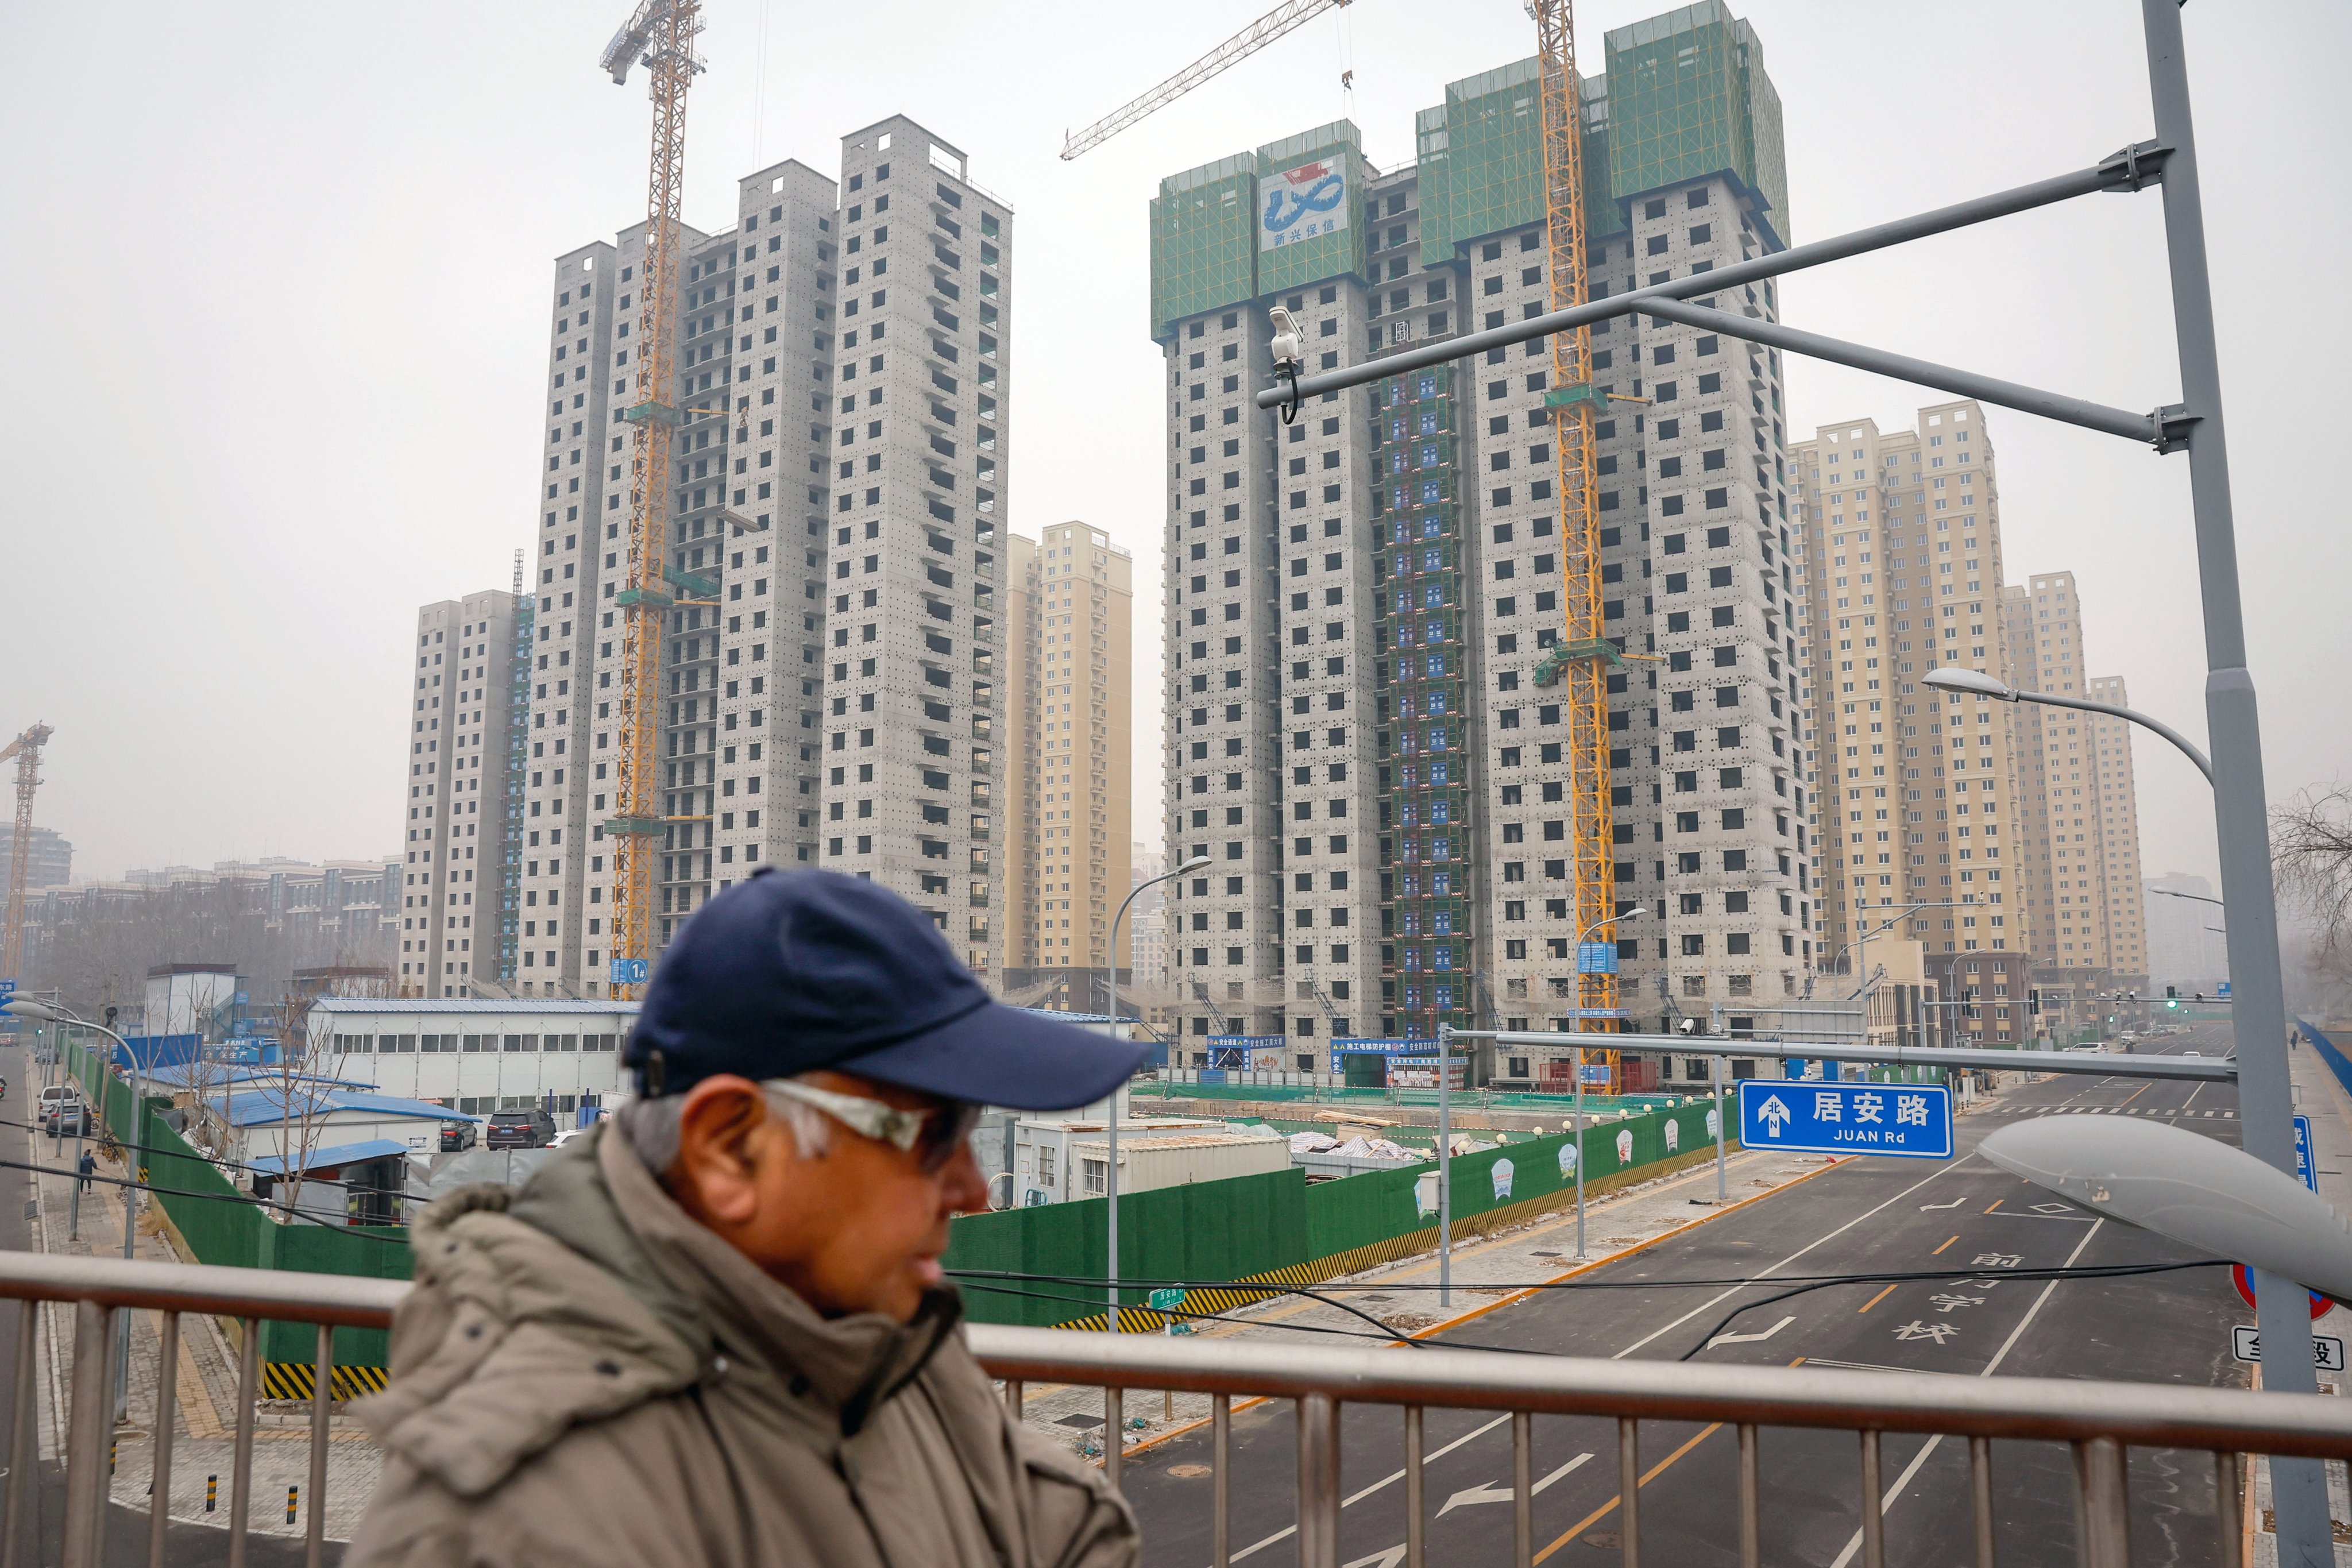 A crisis in China’s property sector is putting stress on local government finances. Photo: EPA-EFE